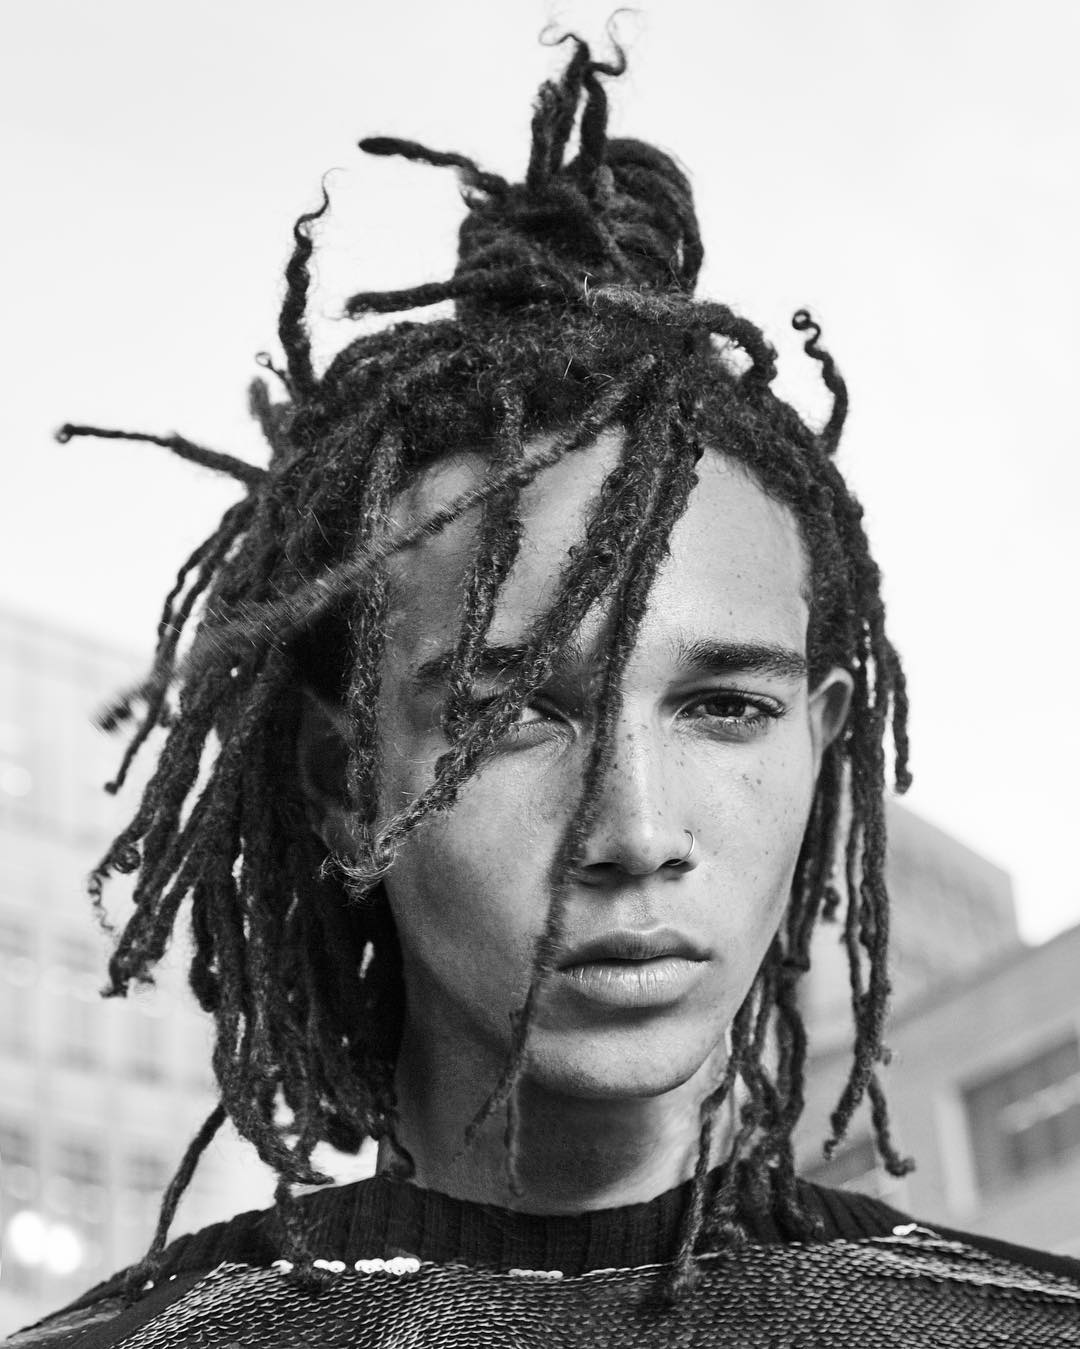 Dreadlocks Styles For Men: Cool + Stylish Dreads Hairstyles For 2023